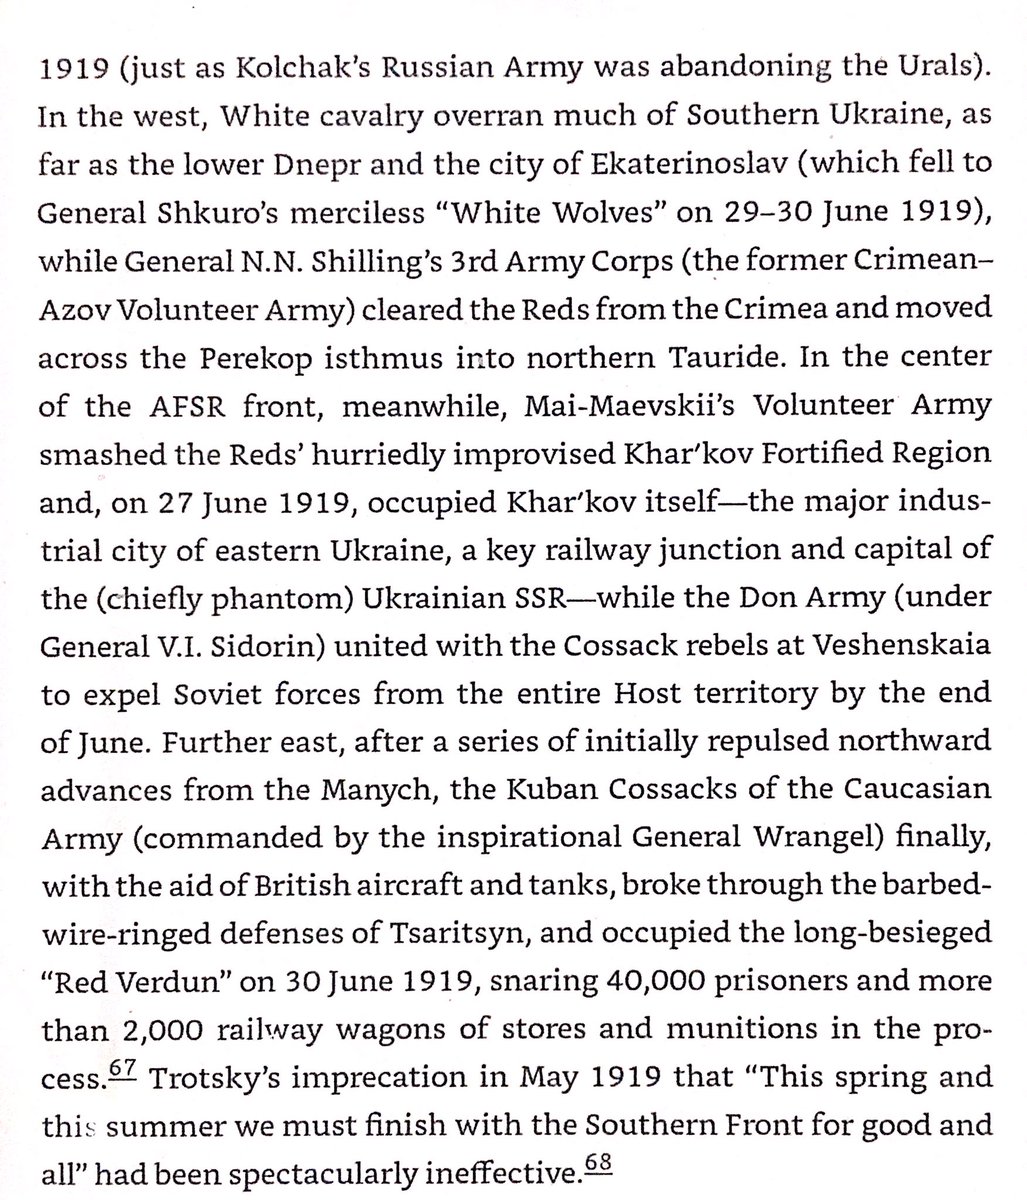 The Whites in 1919 had excellent cavalry - in June Andrey Shkuro’s “White Wolves” overran the southern Dnepr, Shilling conquered Crimea, May-Mayevsky took Harkov, & Vrangel ended the brutal siege of Tsaritsyn (modern Volgograd) by storming the city.